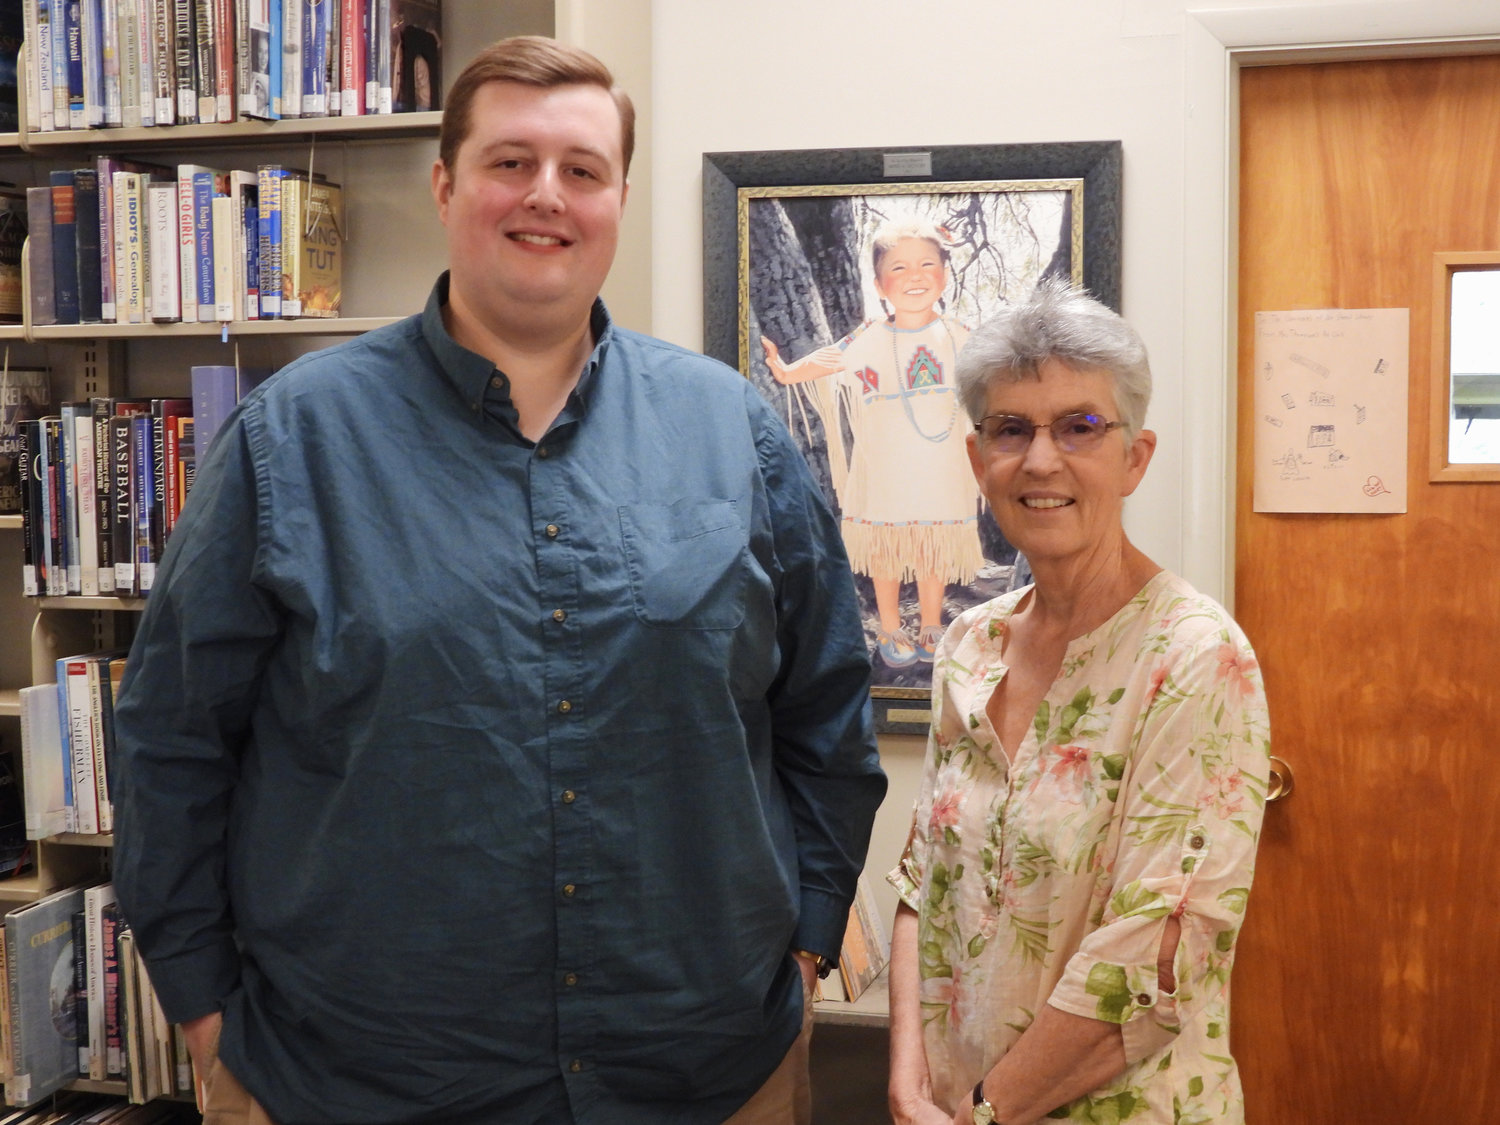 The Sherrill-Kenwood Library is saying goodbye to Library Manager Mary Kay Junglen and welcoming Bill Loveland, who will be the library’s next manager. The public is invited to the Library’s Aloha Celebration and Reception on Thursday, July 7, starting at 6 p.m.